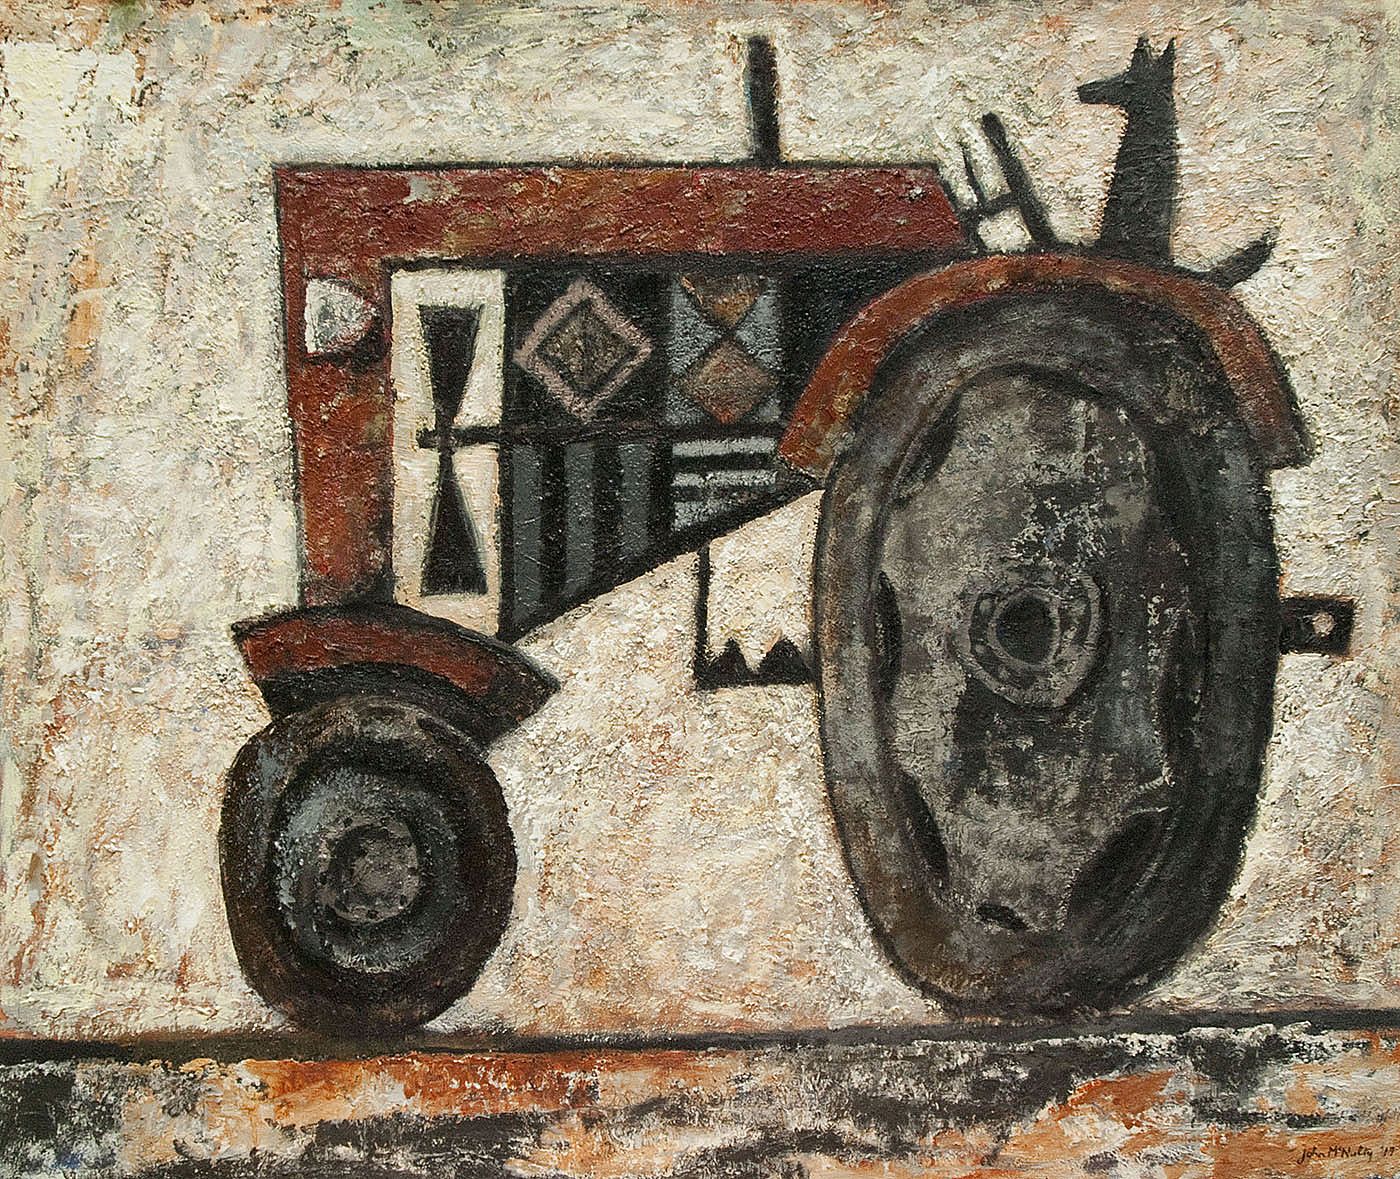 Tractor with dog 3 by John  McNulty 